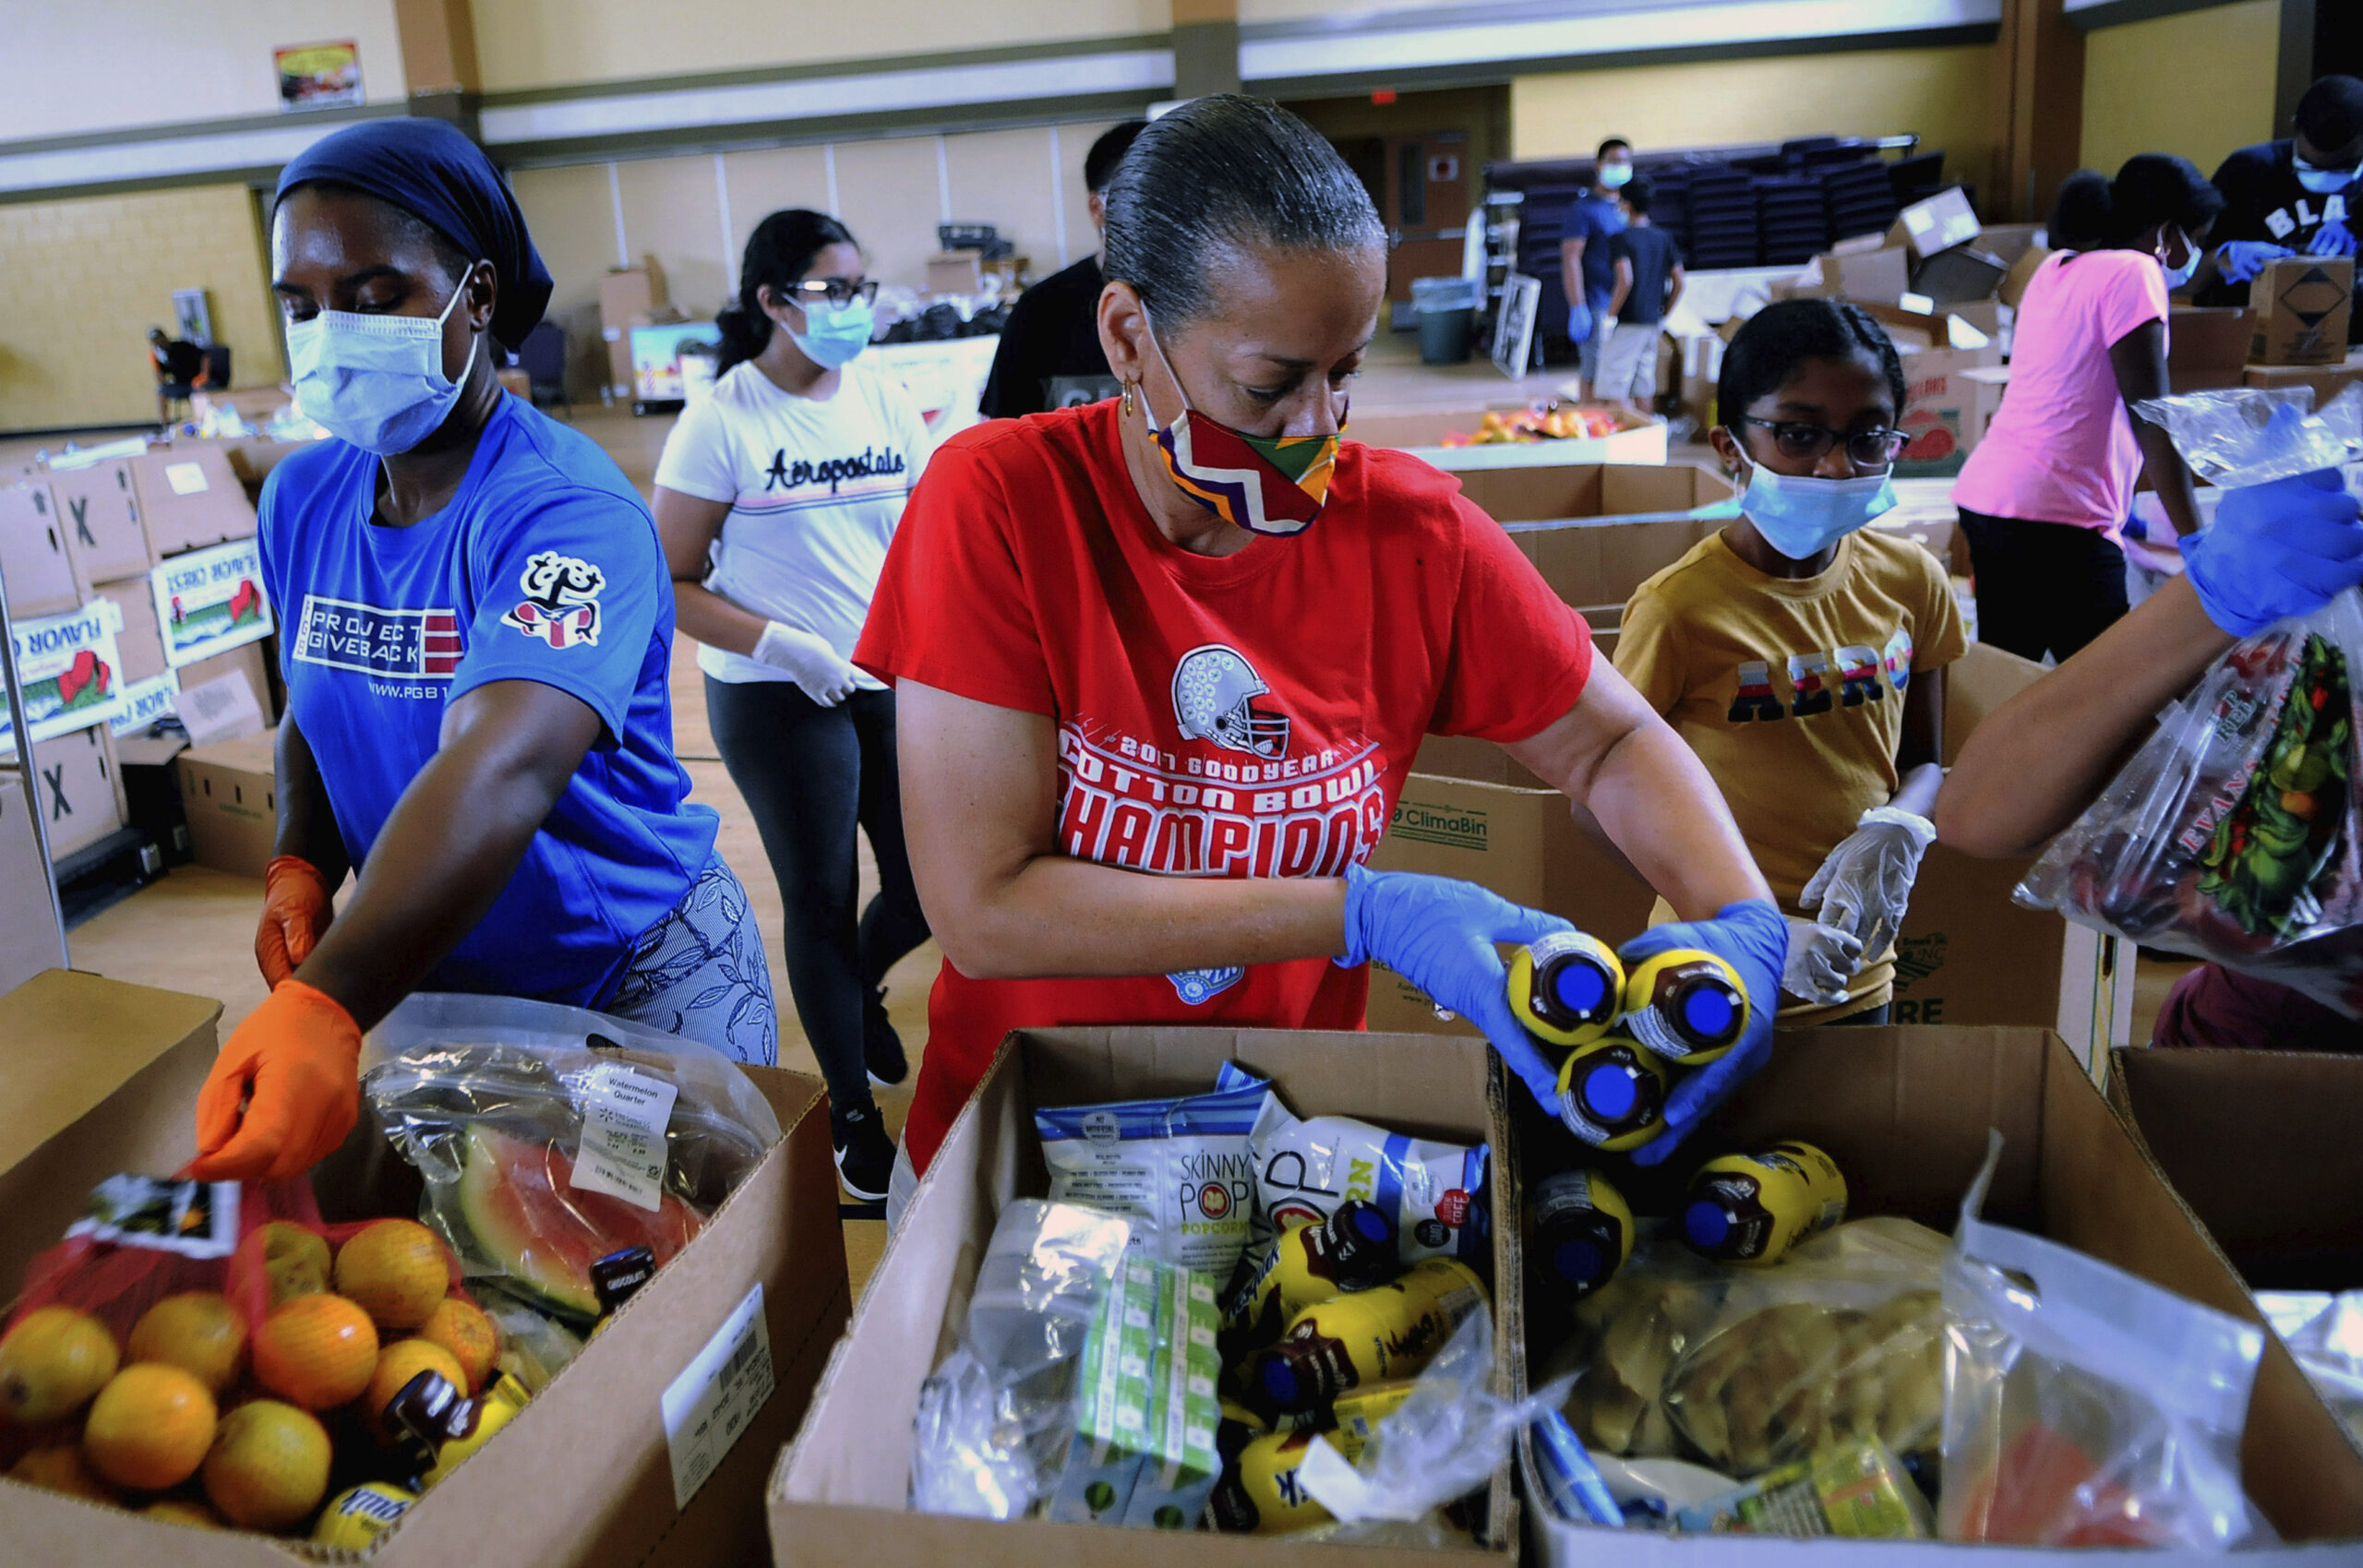 Volunteers prepare boxes of food from the Second Harvest Food Bank of Central Florida during a drive-through food distribution event, July 2020. Mutual aid efforts during the pandemic served as inspiration for Alissa Quart, NF '10, while writing her book "Bootstrapped"